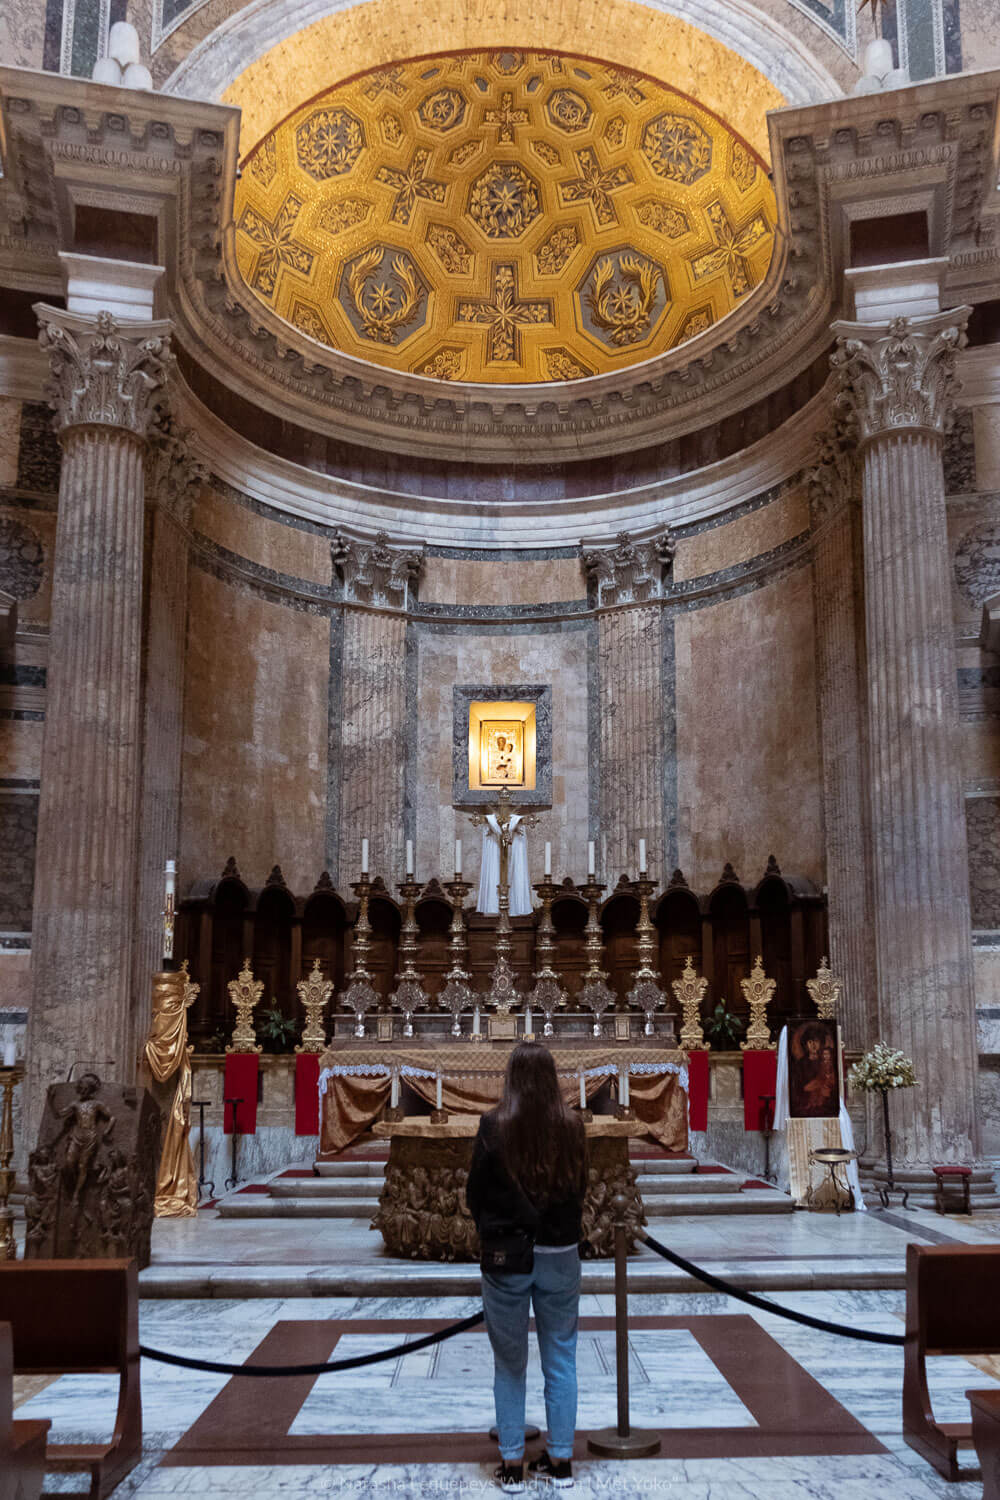 The altar in the Pantheon in Rome, Italy. Travel photography and guide by © Natasha Lequepeys for "And Then I Met Yoko". #rome #italy #travelblog #travelphotography